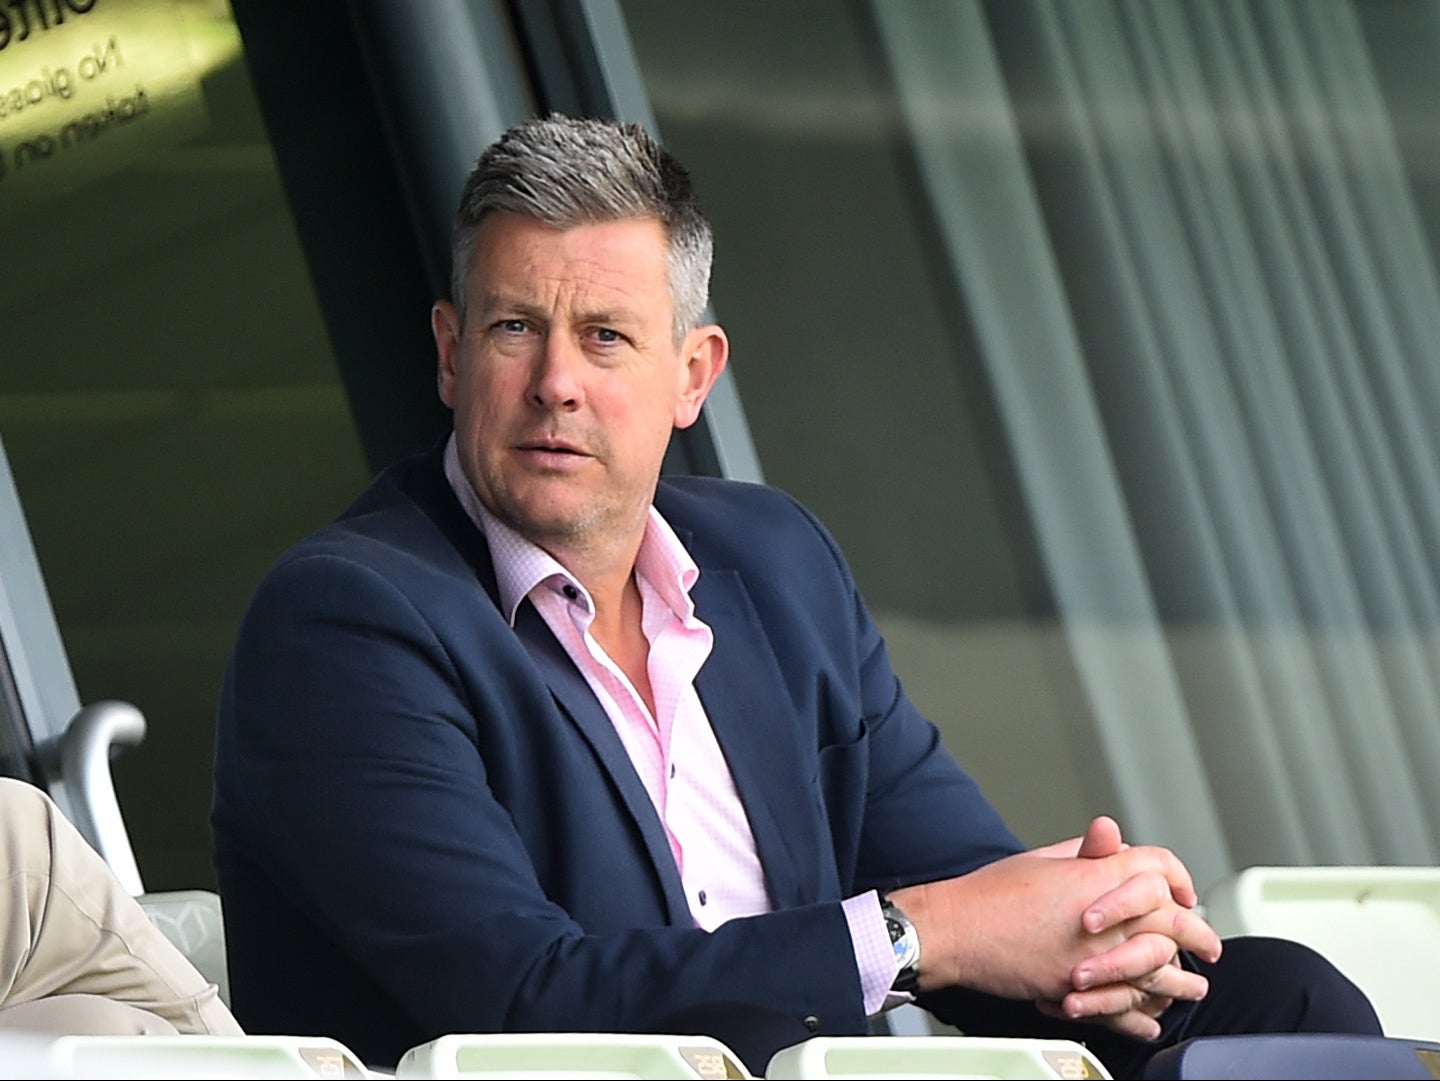 Giles has been dismissed after a horrendous 2021 for England’s Test side